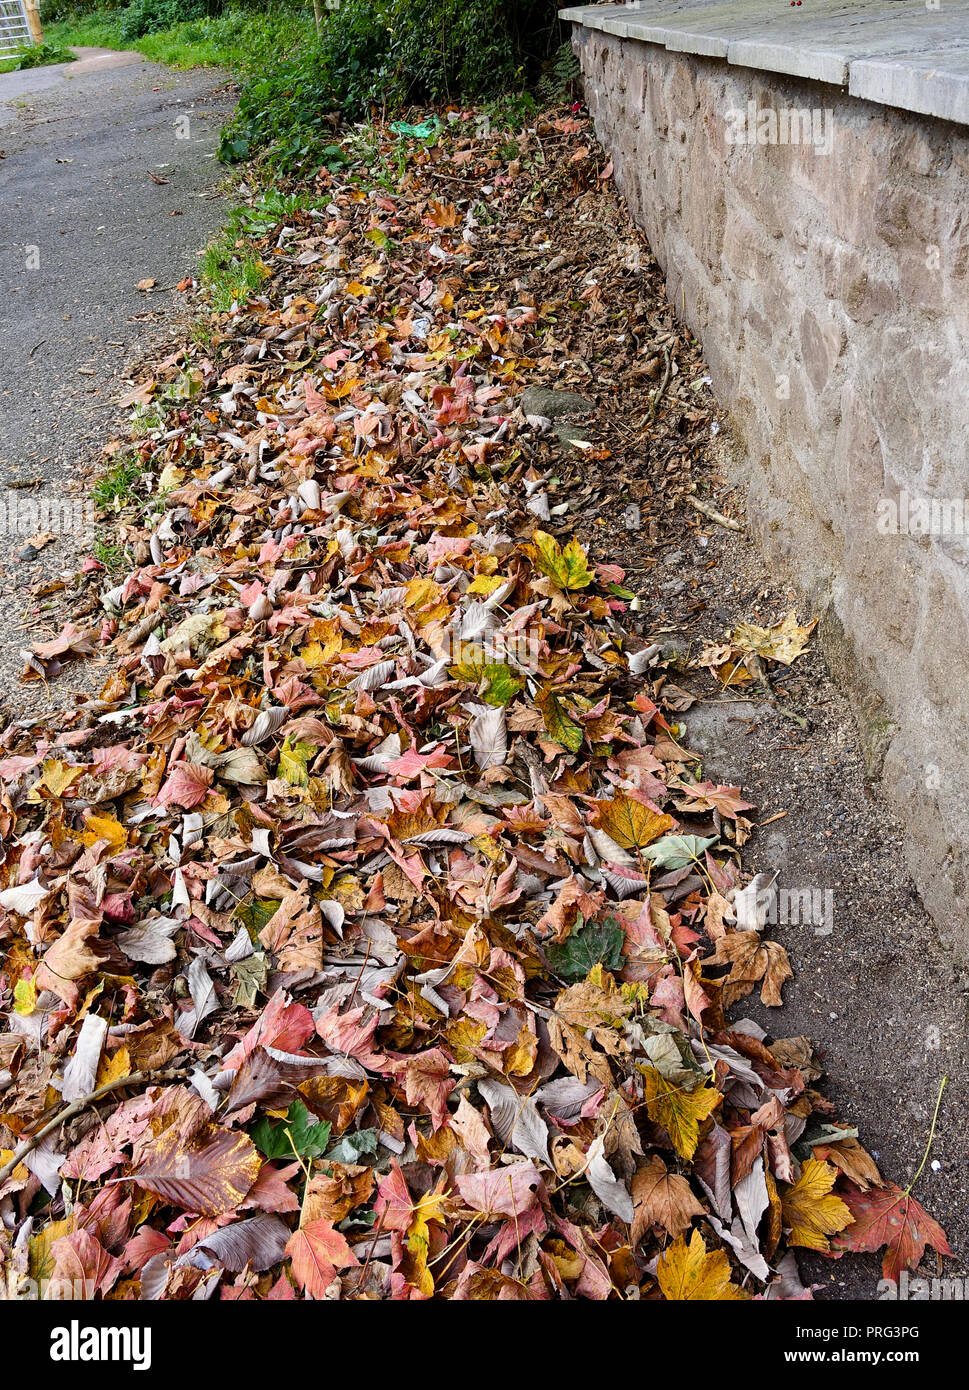 Fallen autumn leaves built up against wall Stock Photo